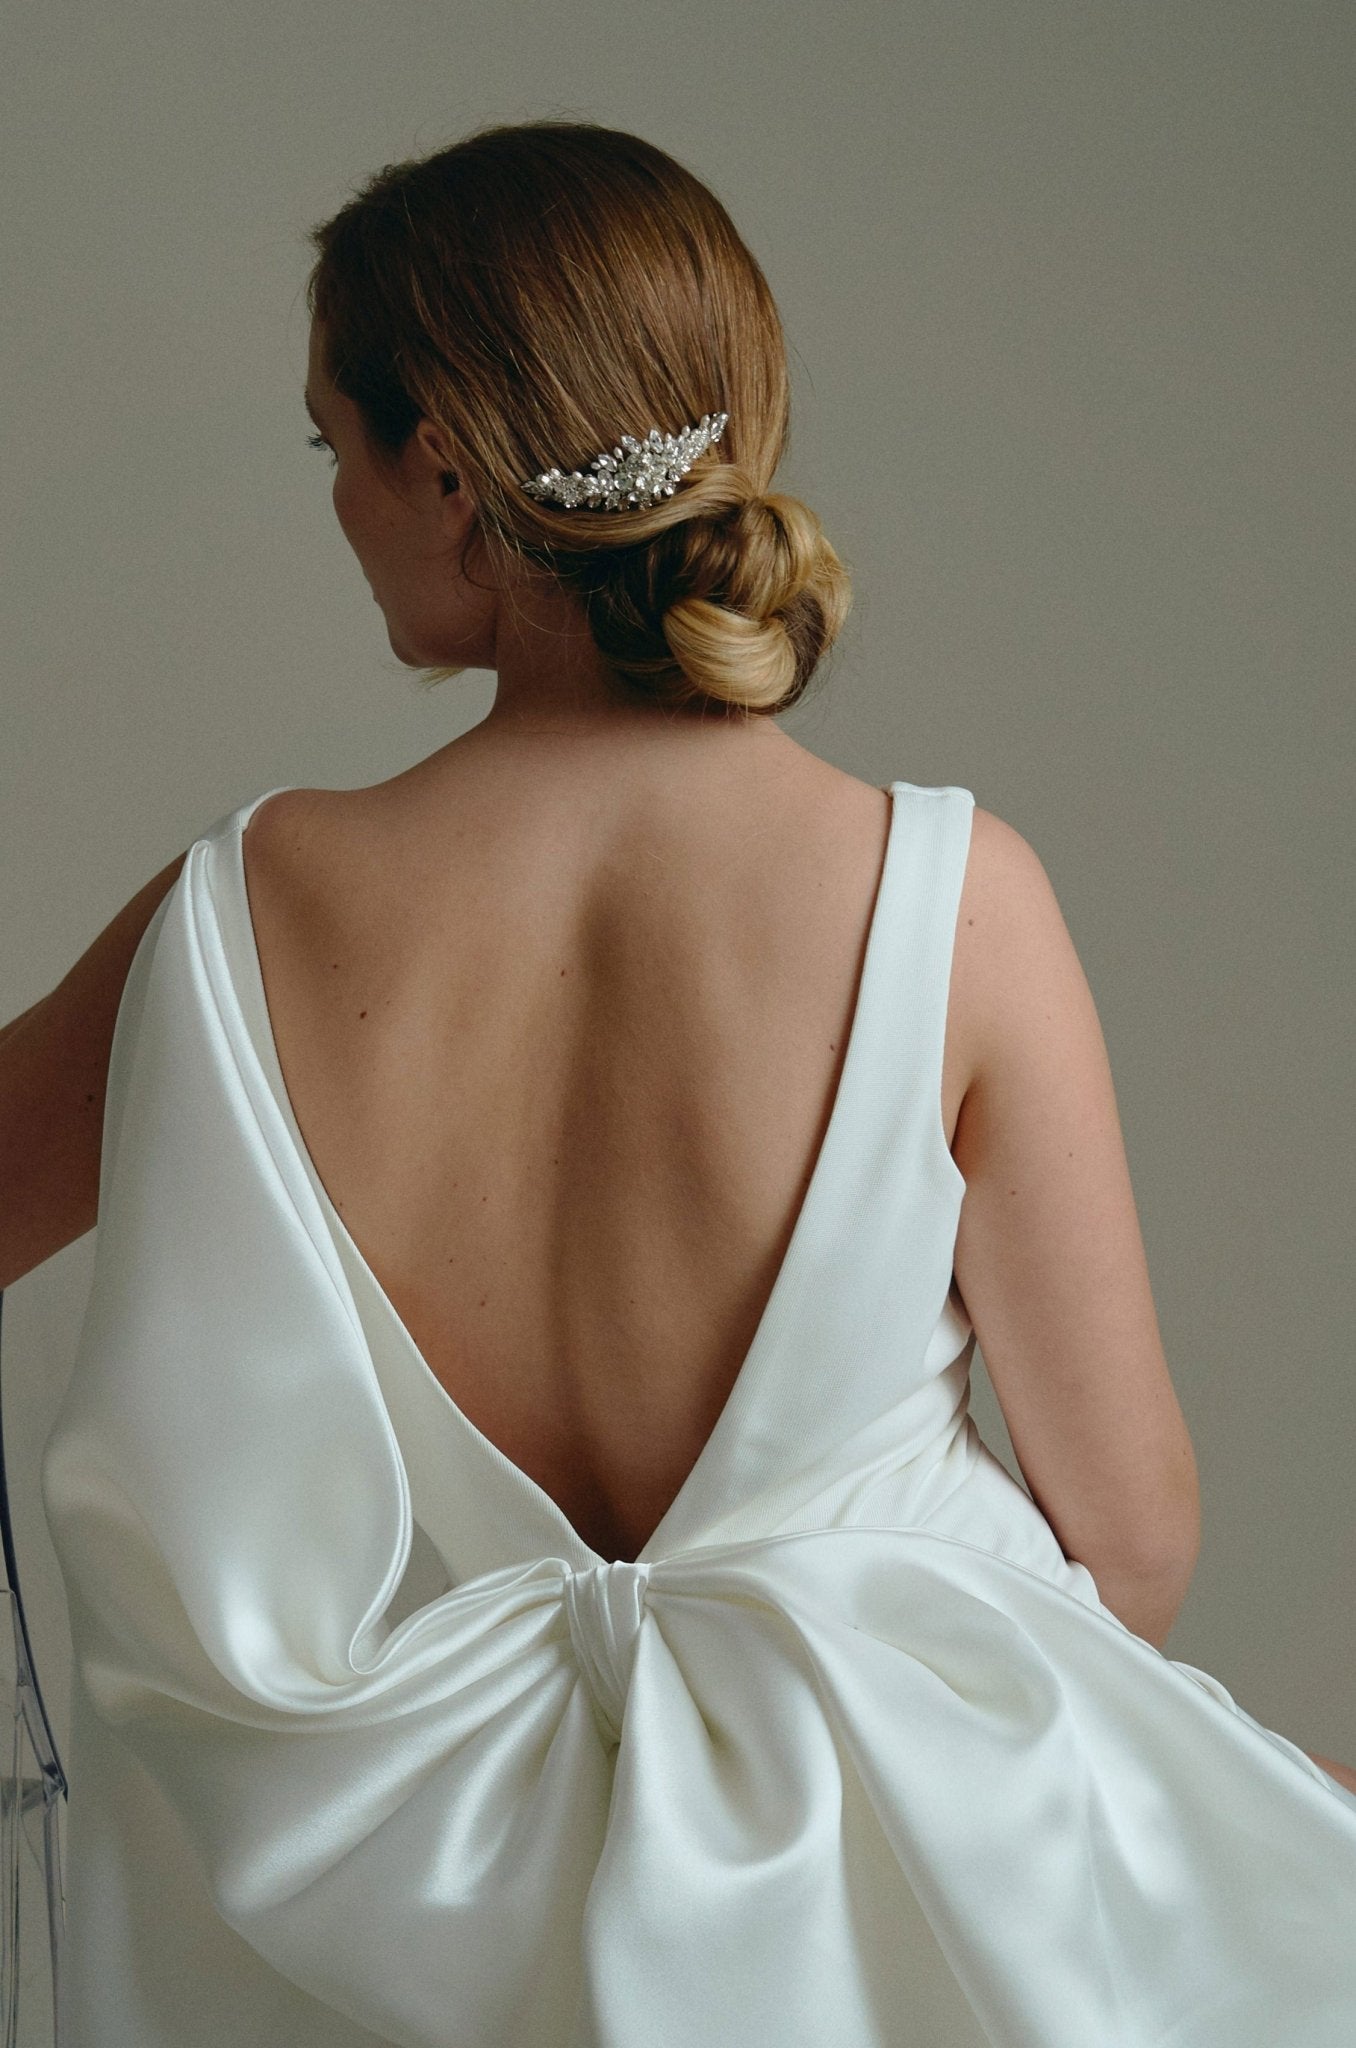 Bridal hair comb with silver crystals and freshwater pearls worn by a bride with a low bun updo and wearing a statement bow bridal gown